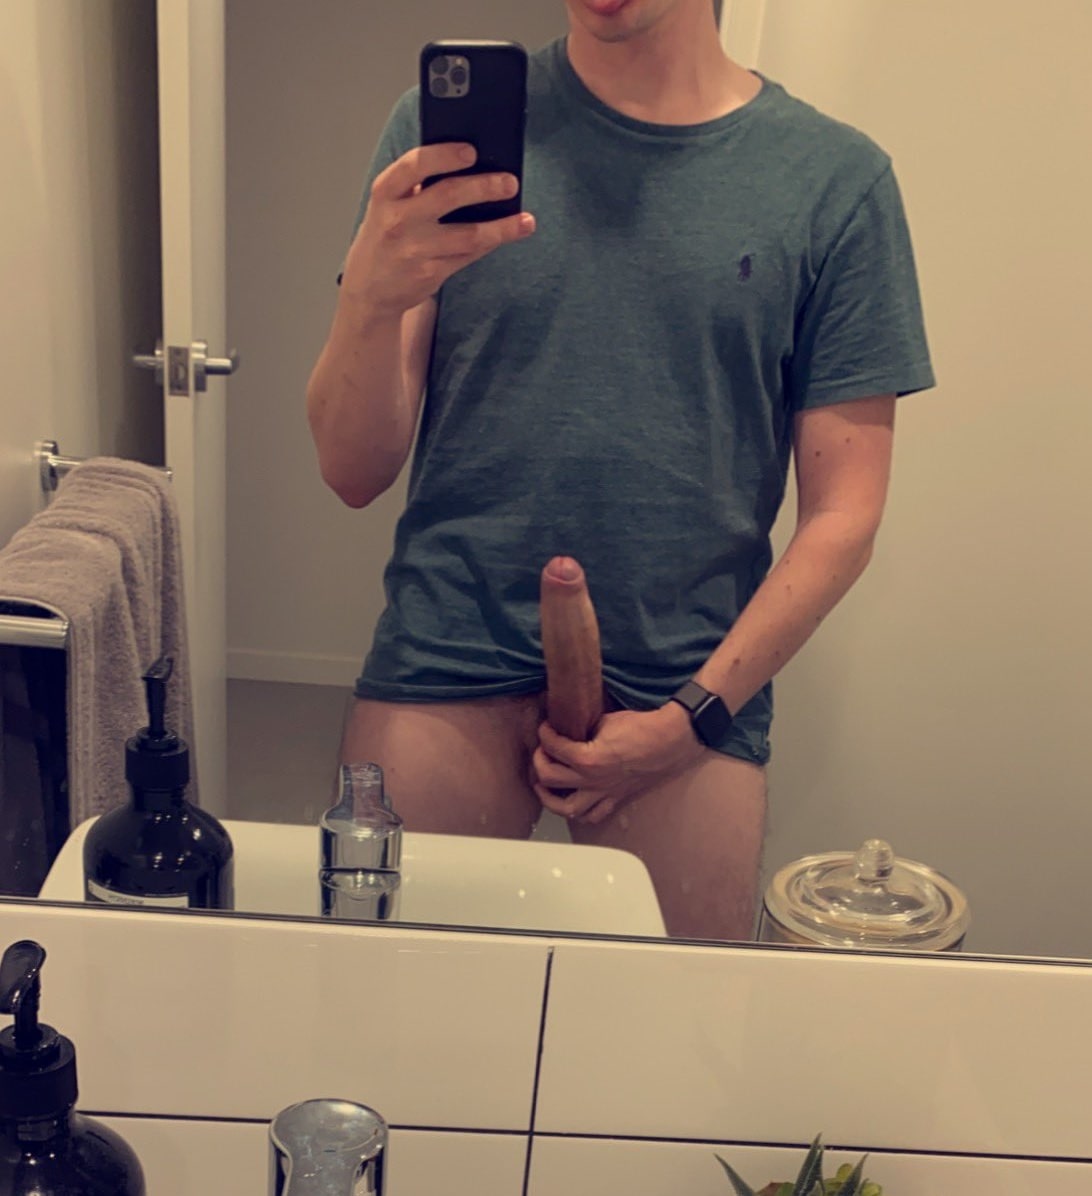 Horny boy in the bathroom taking a picture of his long hard uncut dick. 